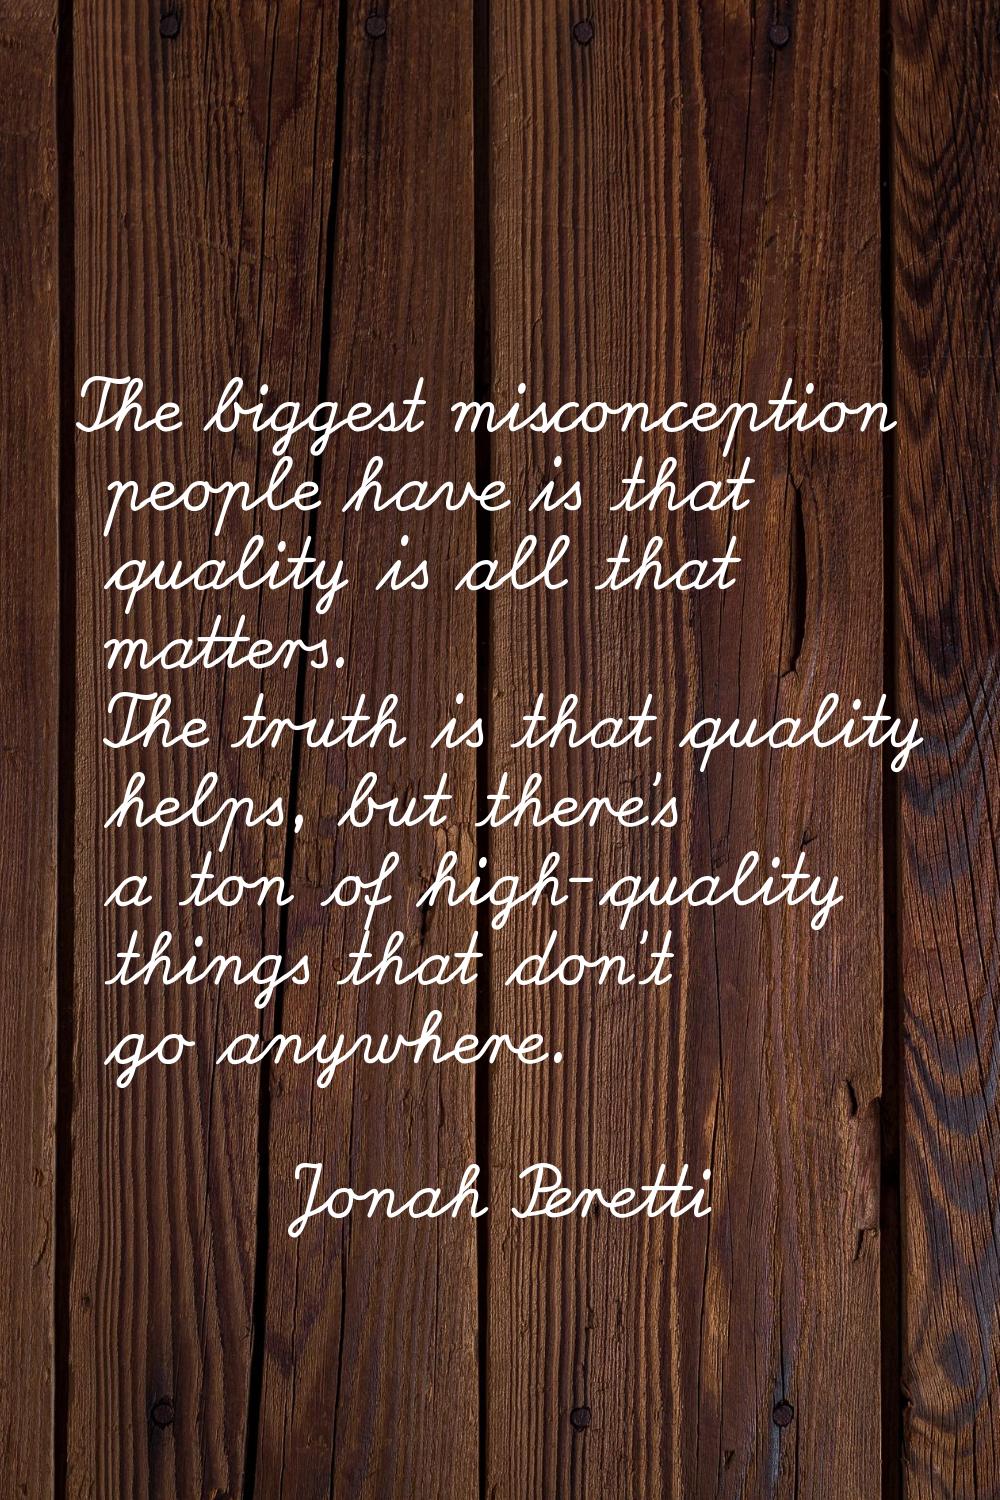 The biggest misconception people have is that quality is all that matters. The truth is that qualit